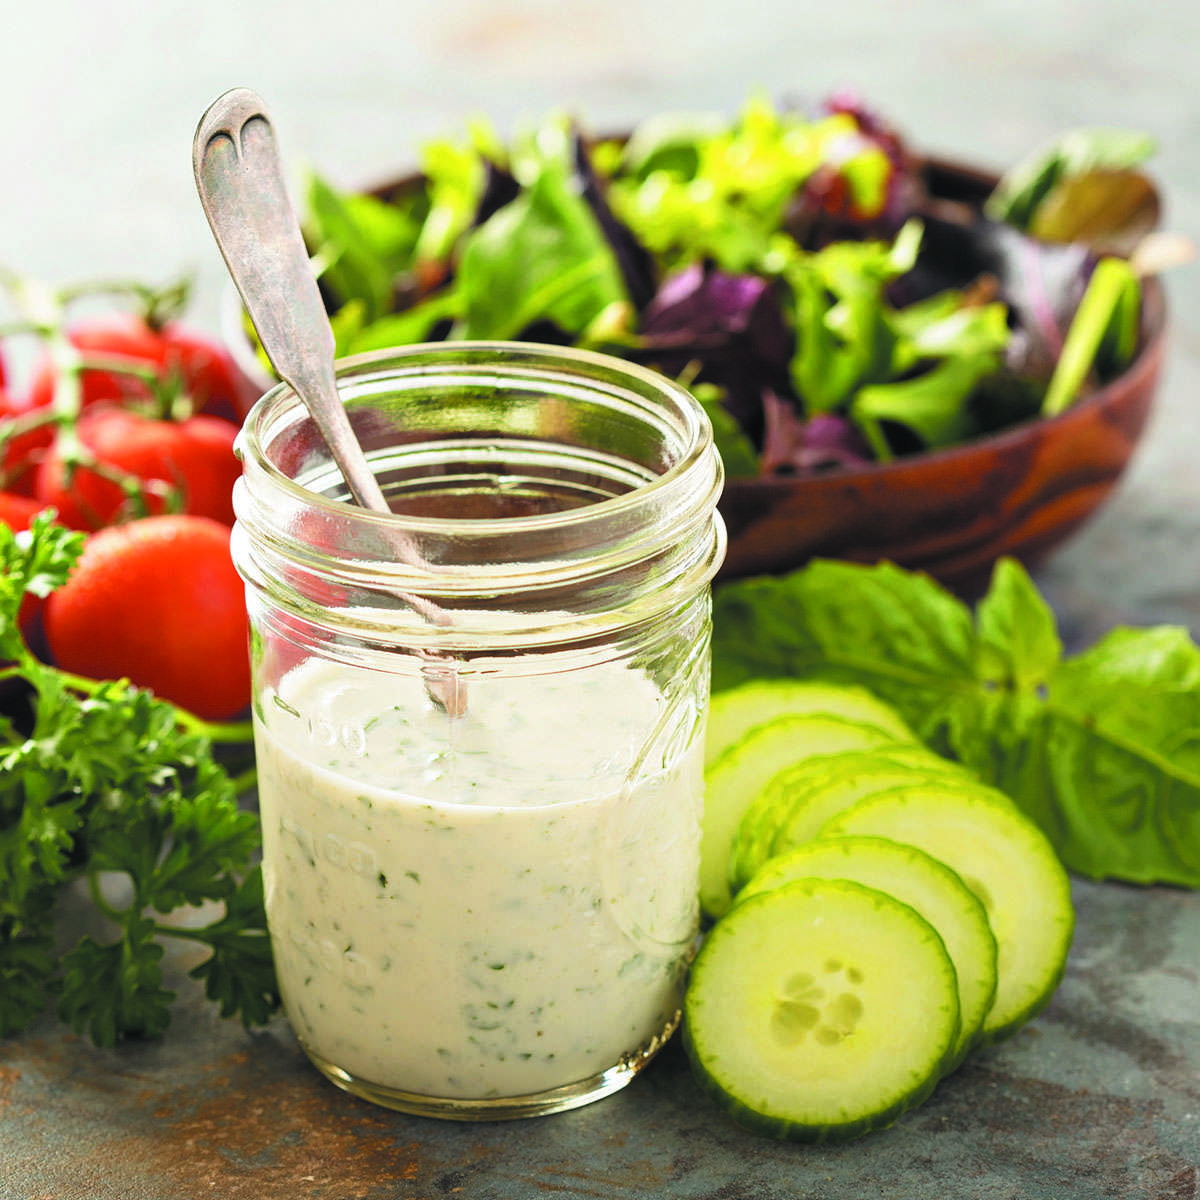 Is your salad dressing hurting your healthy diet?